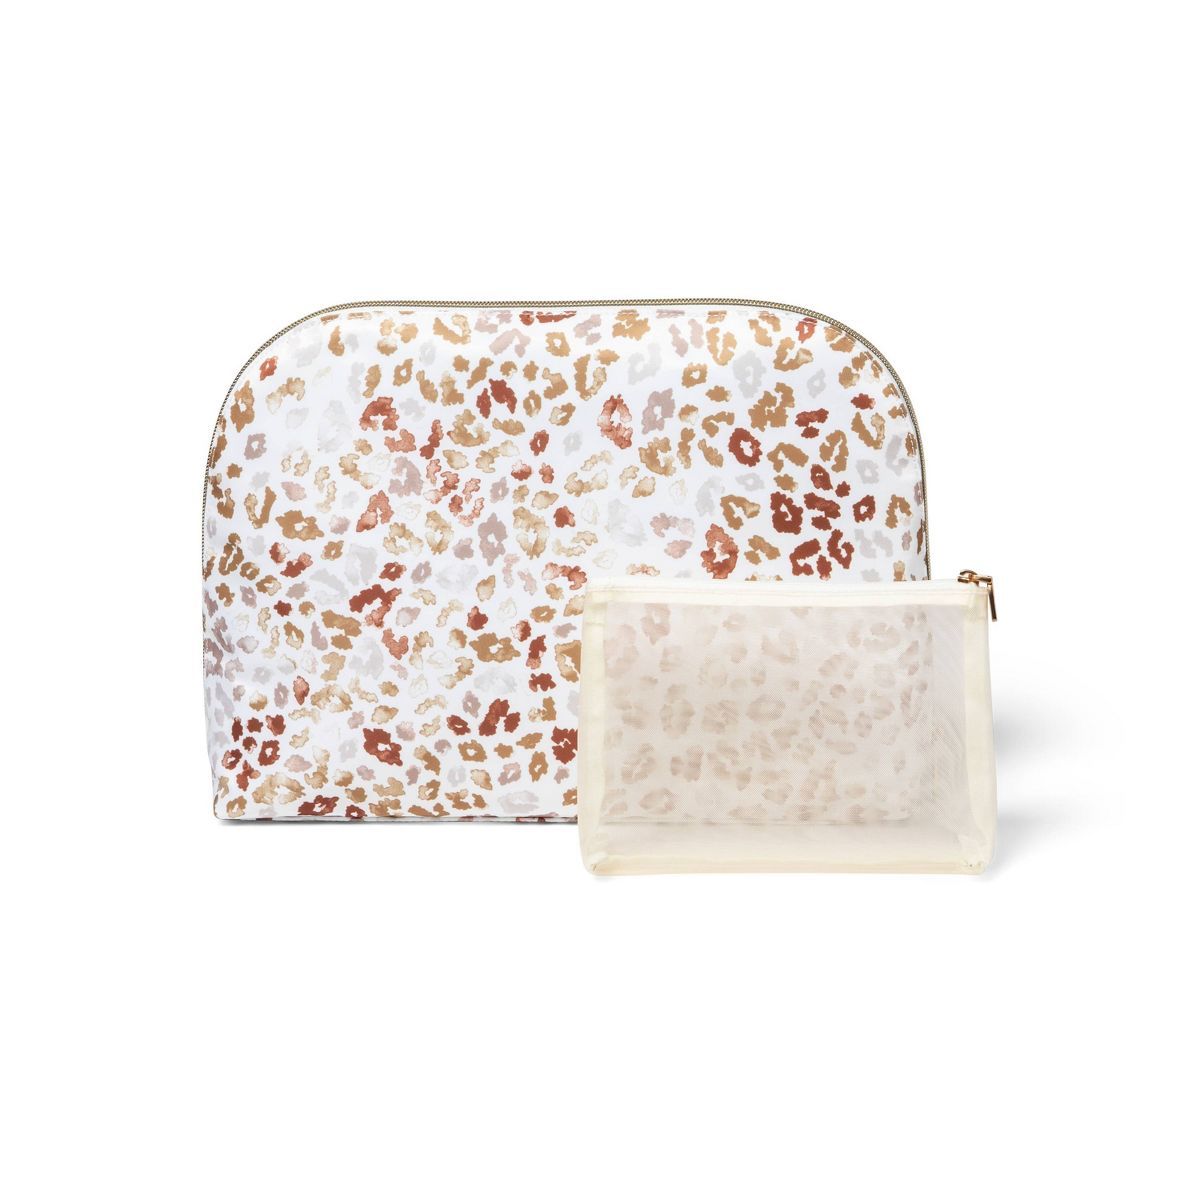 Sonia Kashuk™ Large Travel Makeup Pouch - Terra Spots | Target